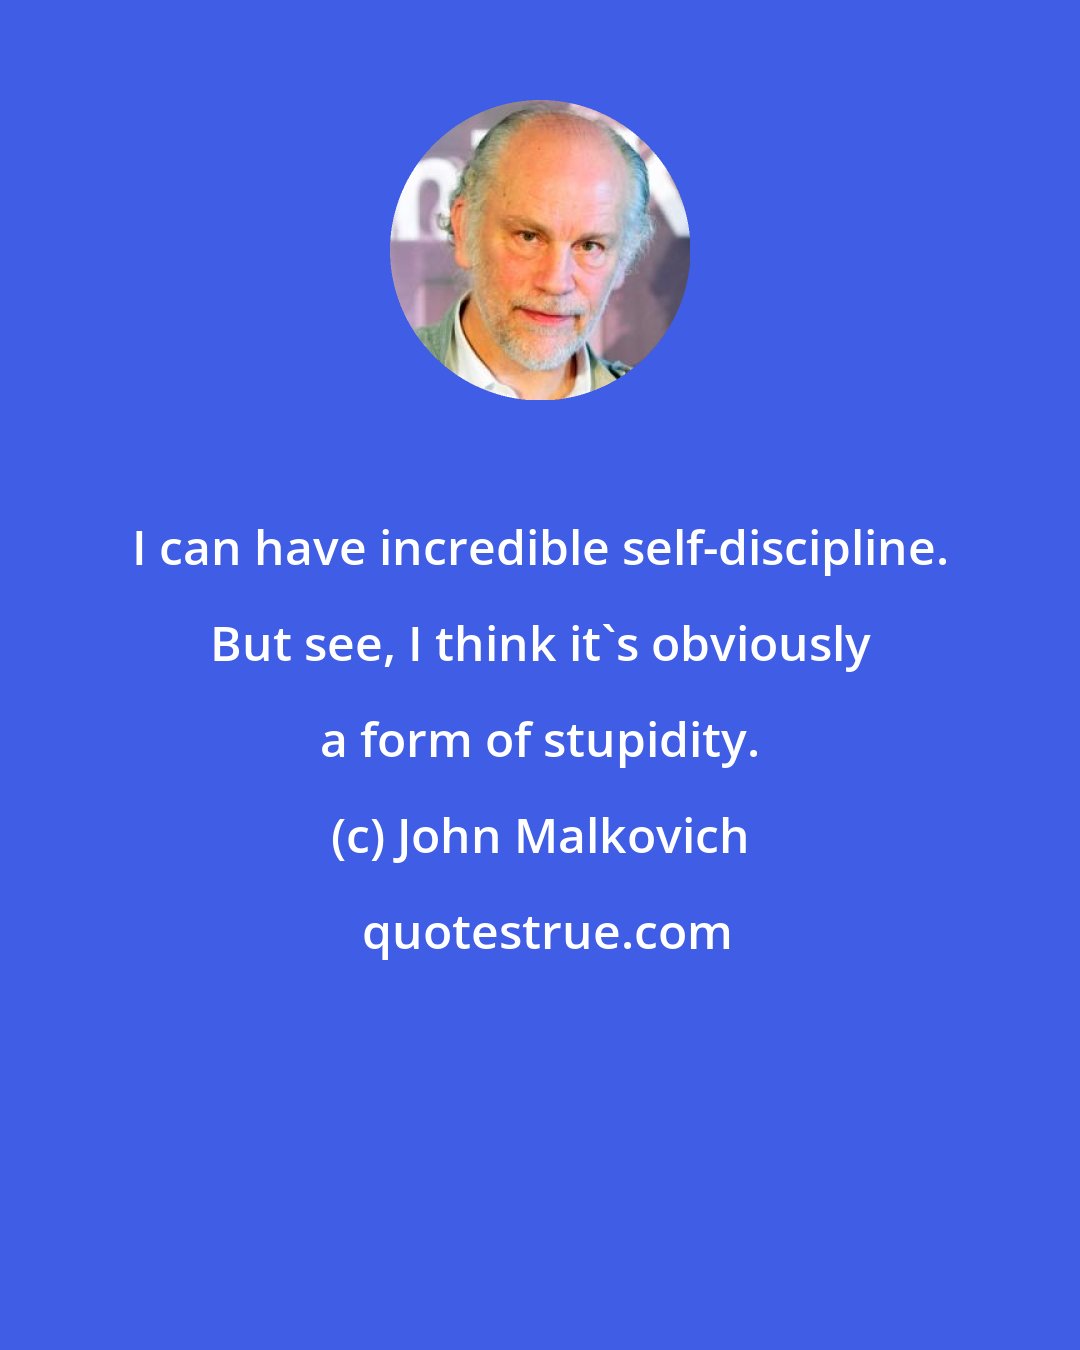 John Malkovich: I can have incredible self-discipline. But see, I think it's obviously a form of stupidity.